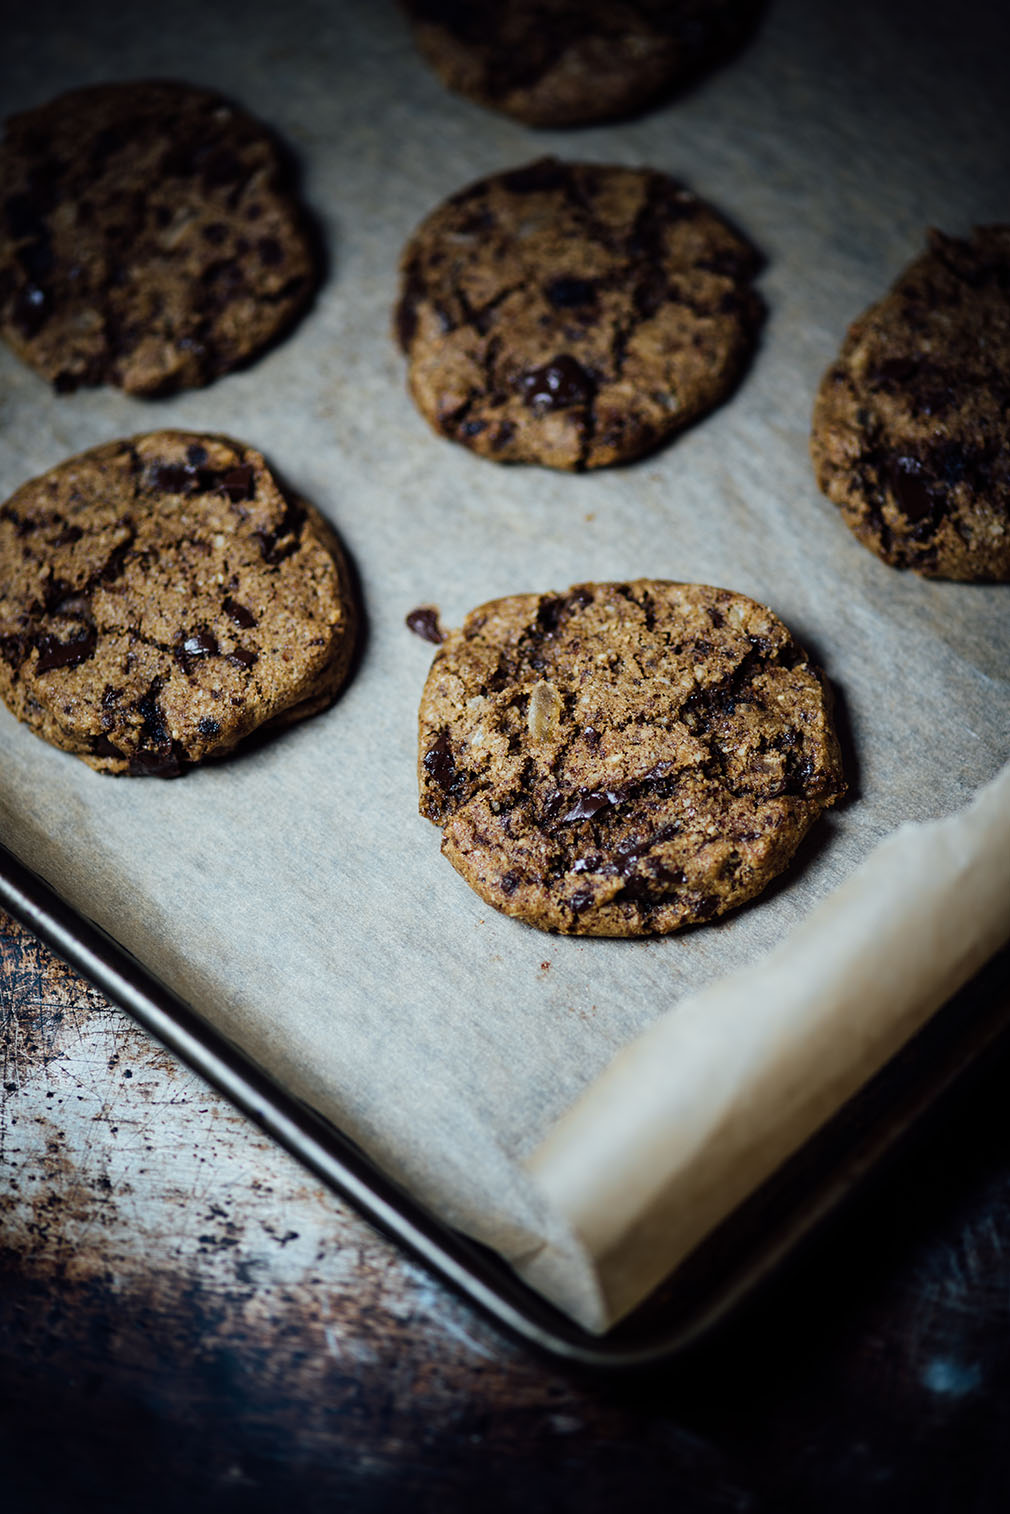 Spicy Chocolate Chip-Hazelnut Cookies by Nik Sharma from Season cookbook: Best Cookbooks of 2018 | featured on Didn't I Just Feed You podcast